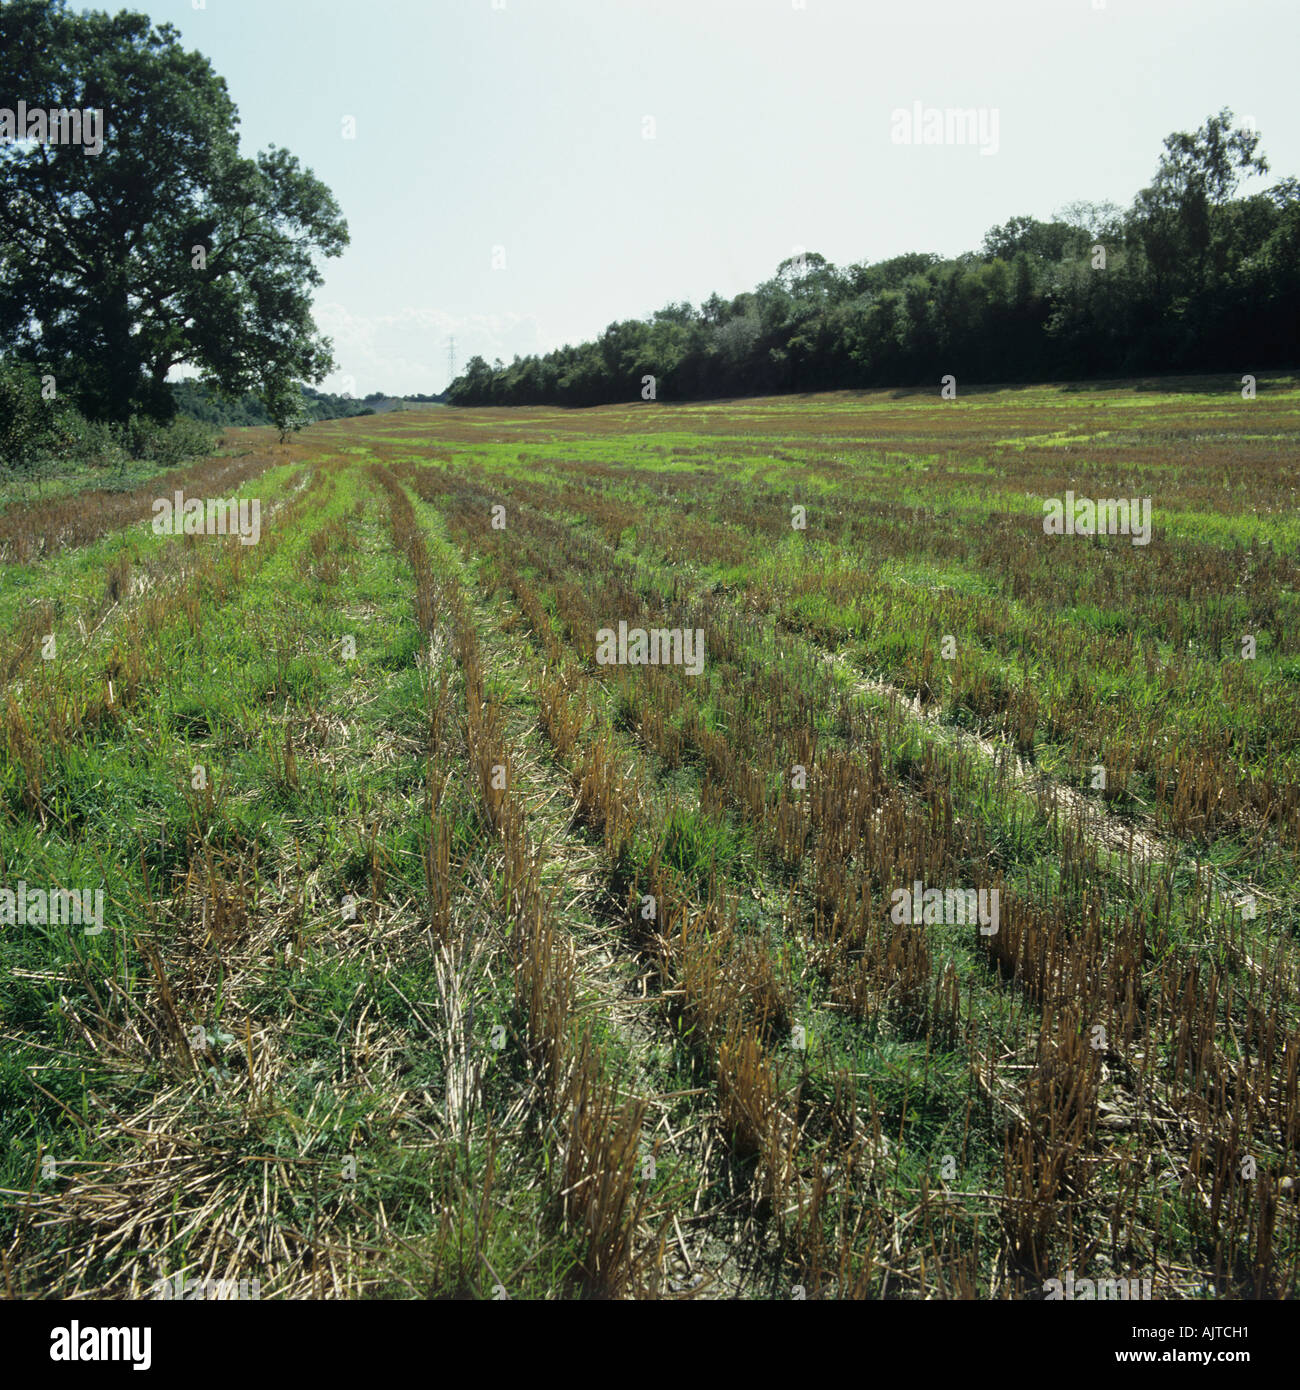 View of cereal stubble with volunteer cereals and other annual weeds post harvest Stock Photo